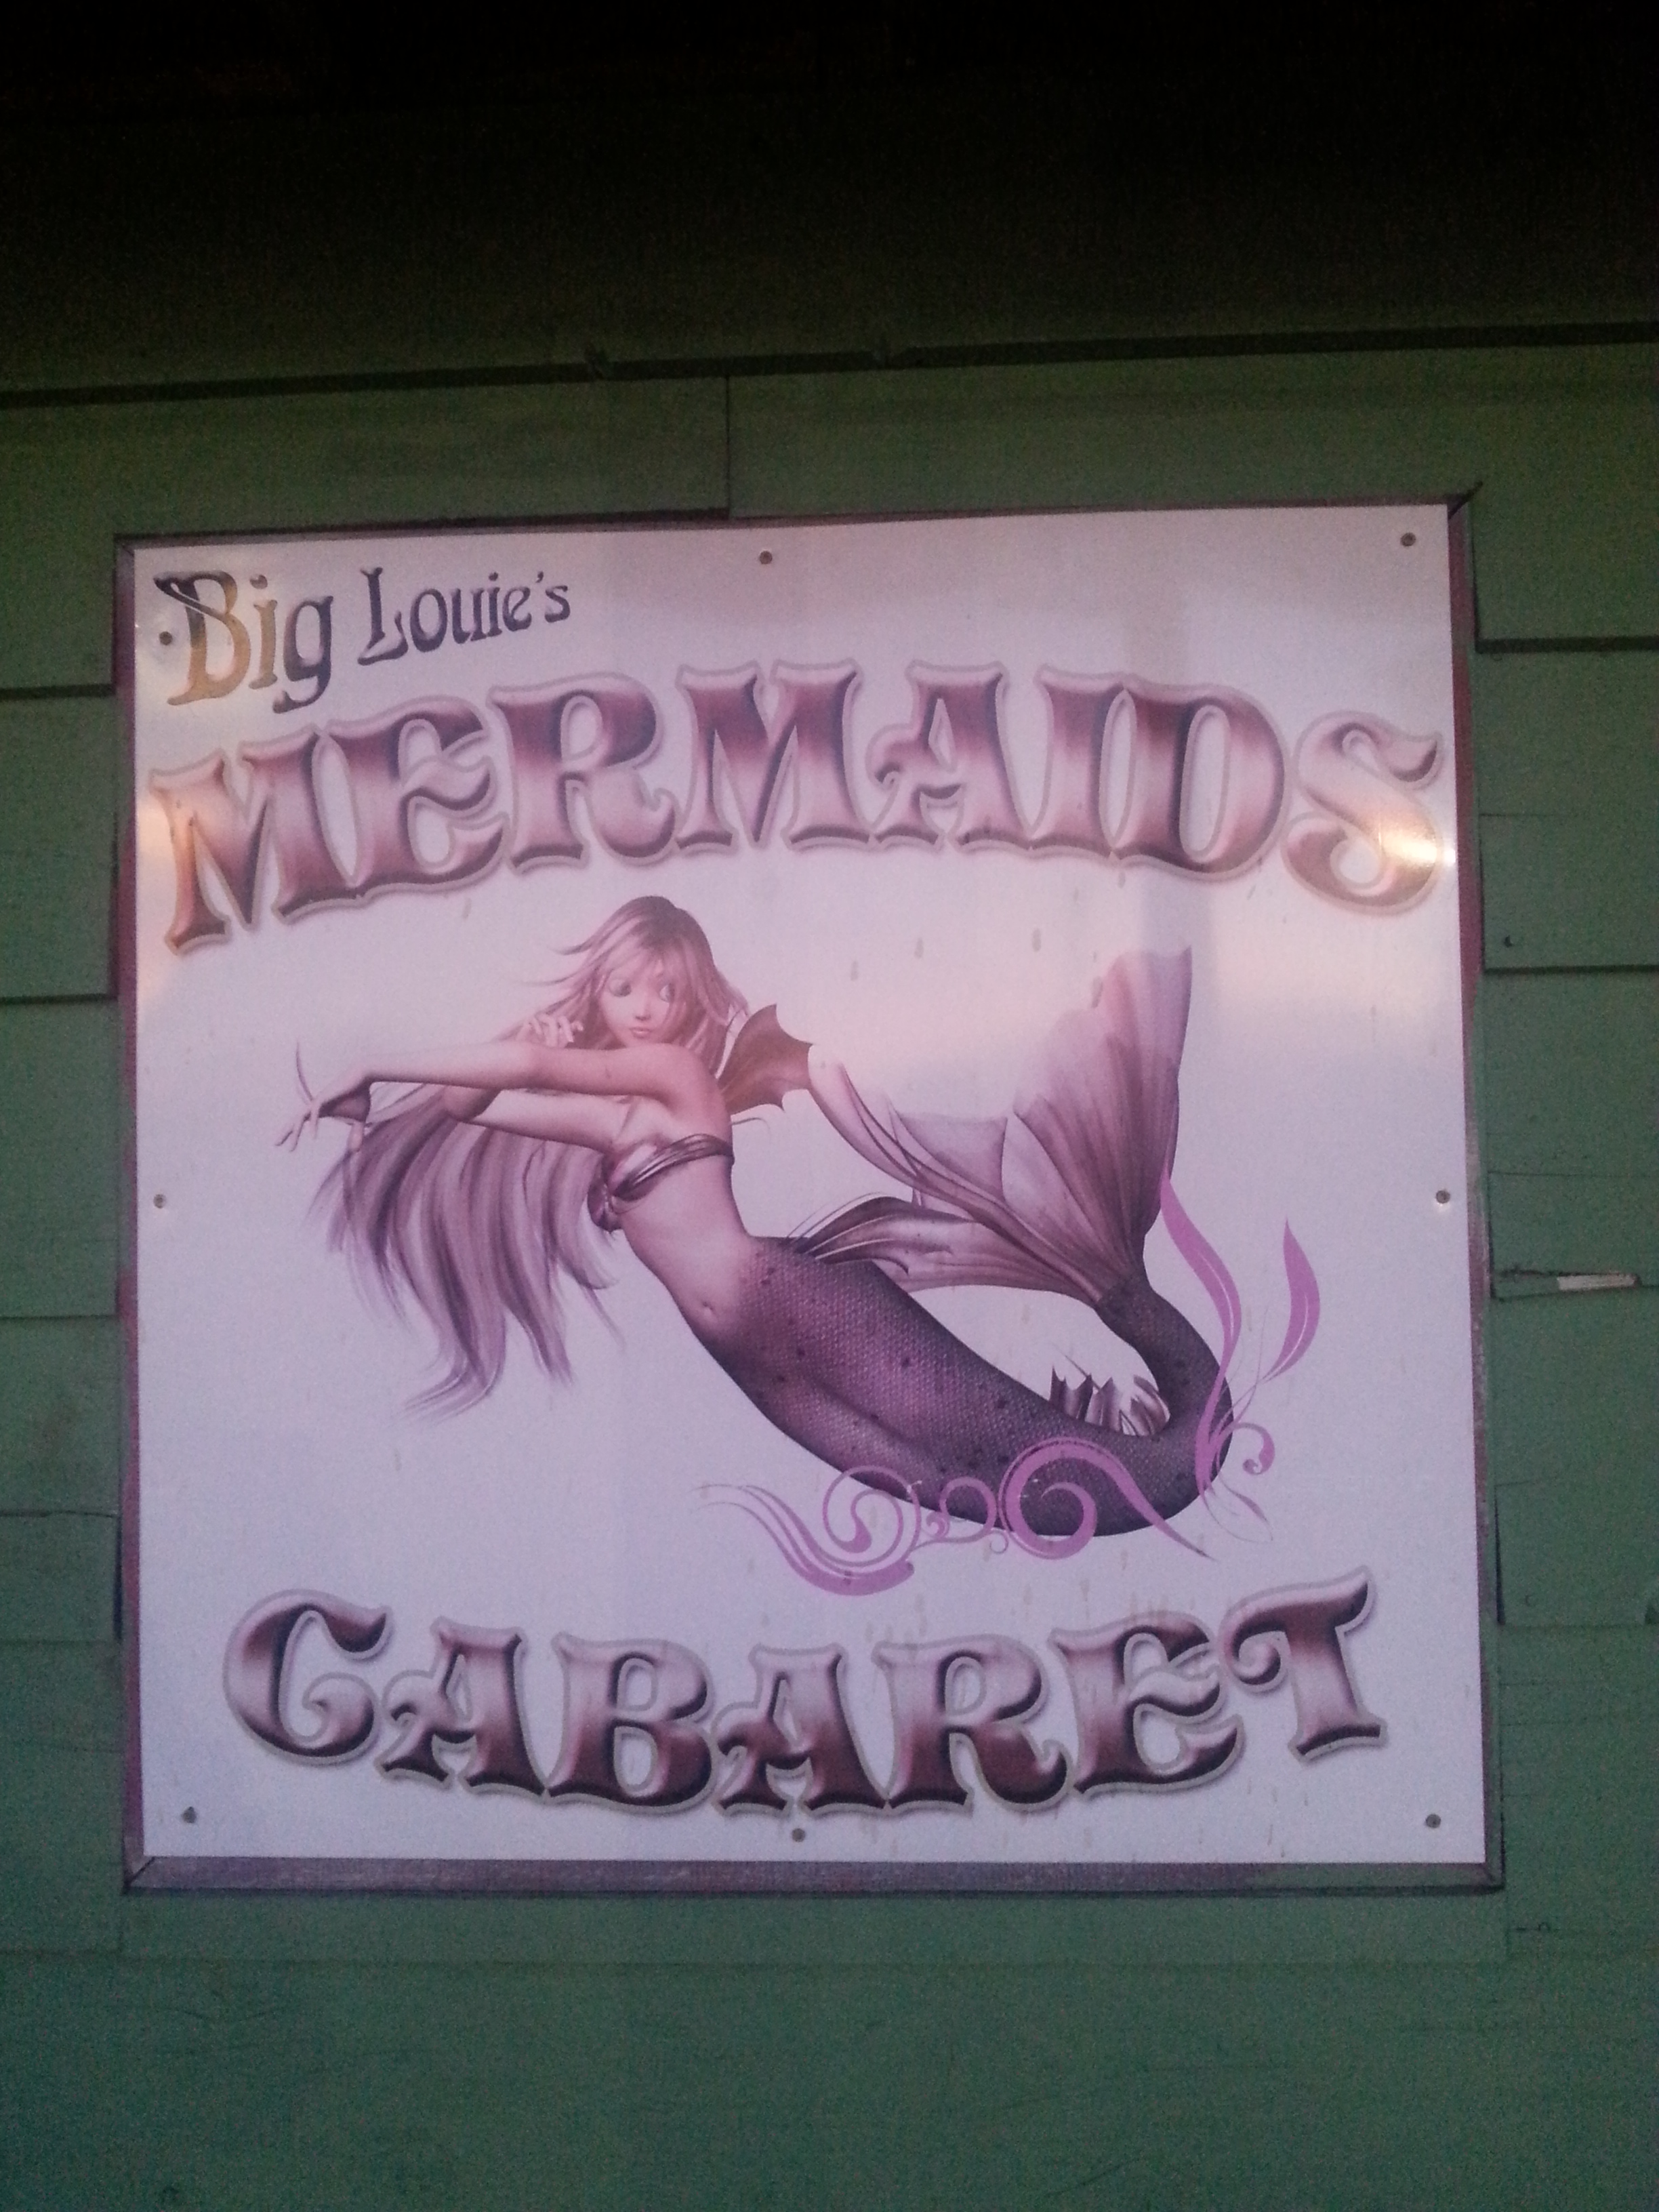 I'm assuming with real mermaids?